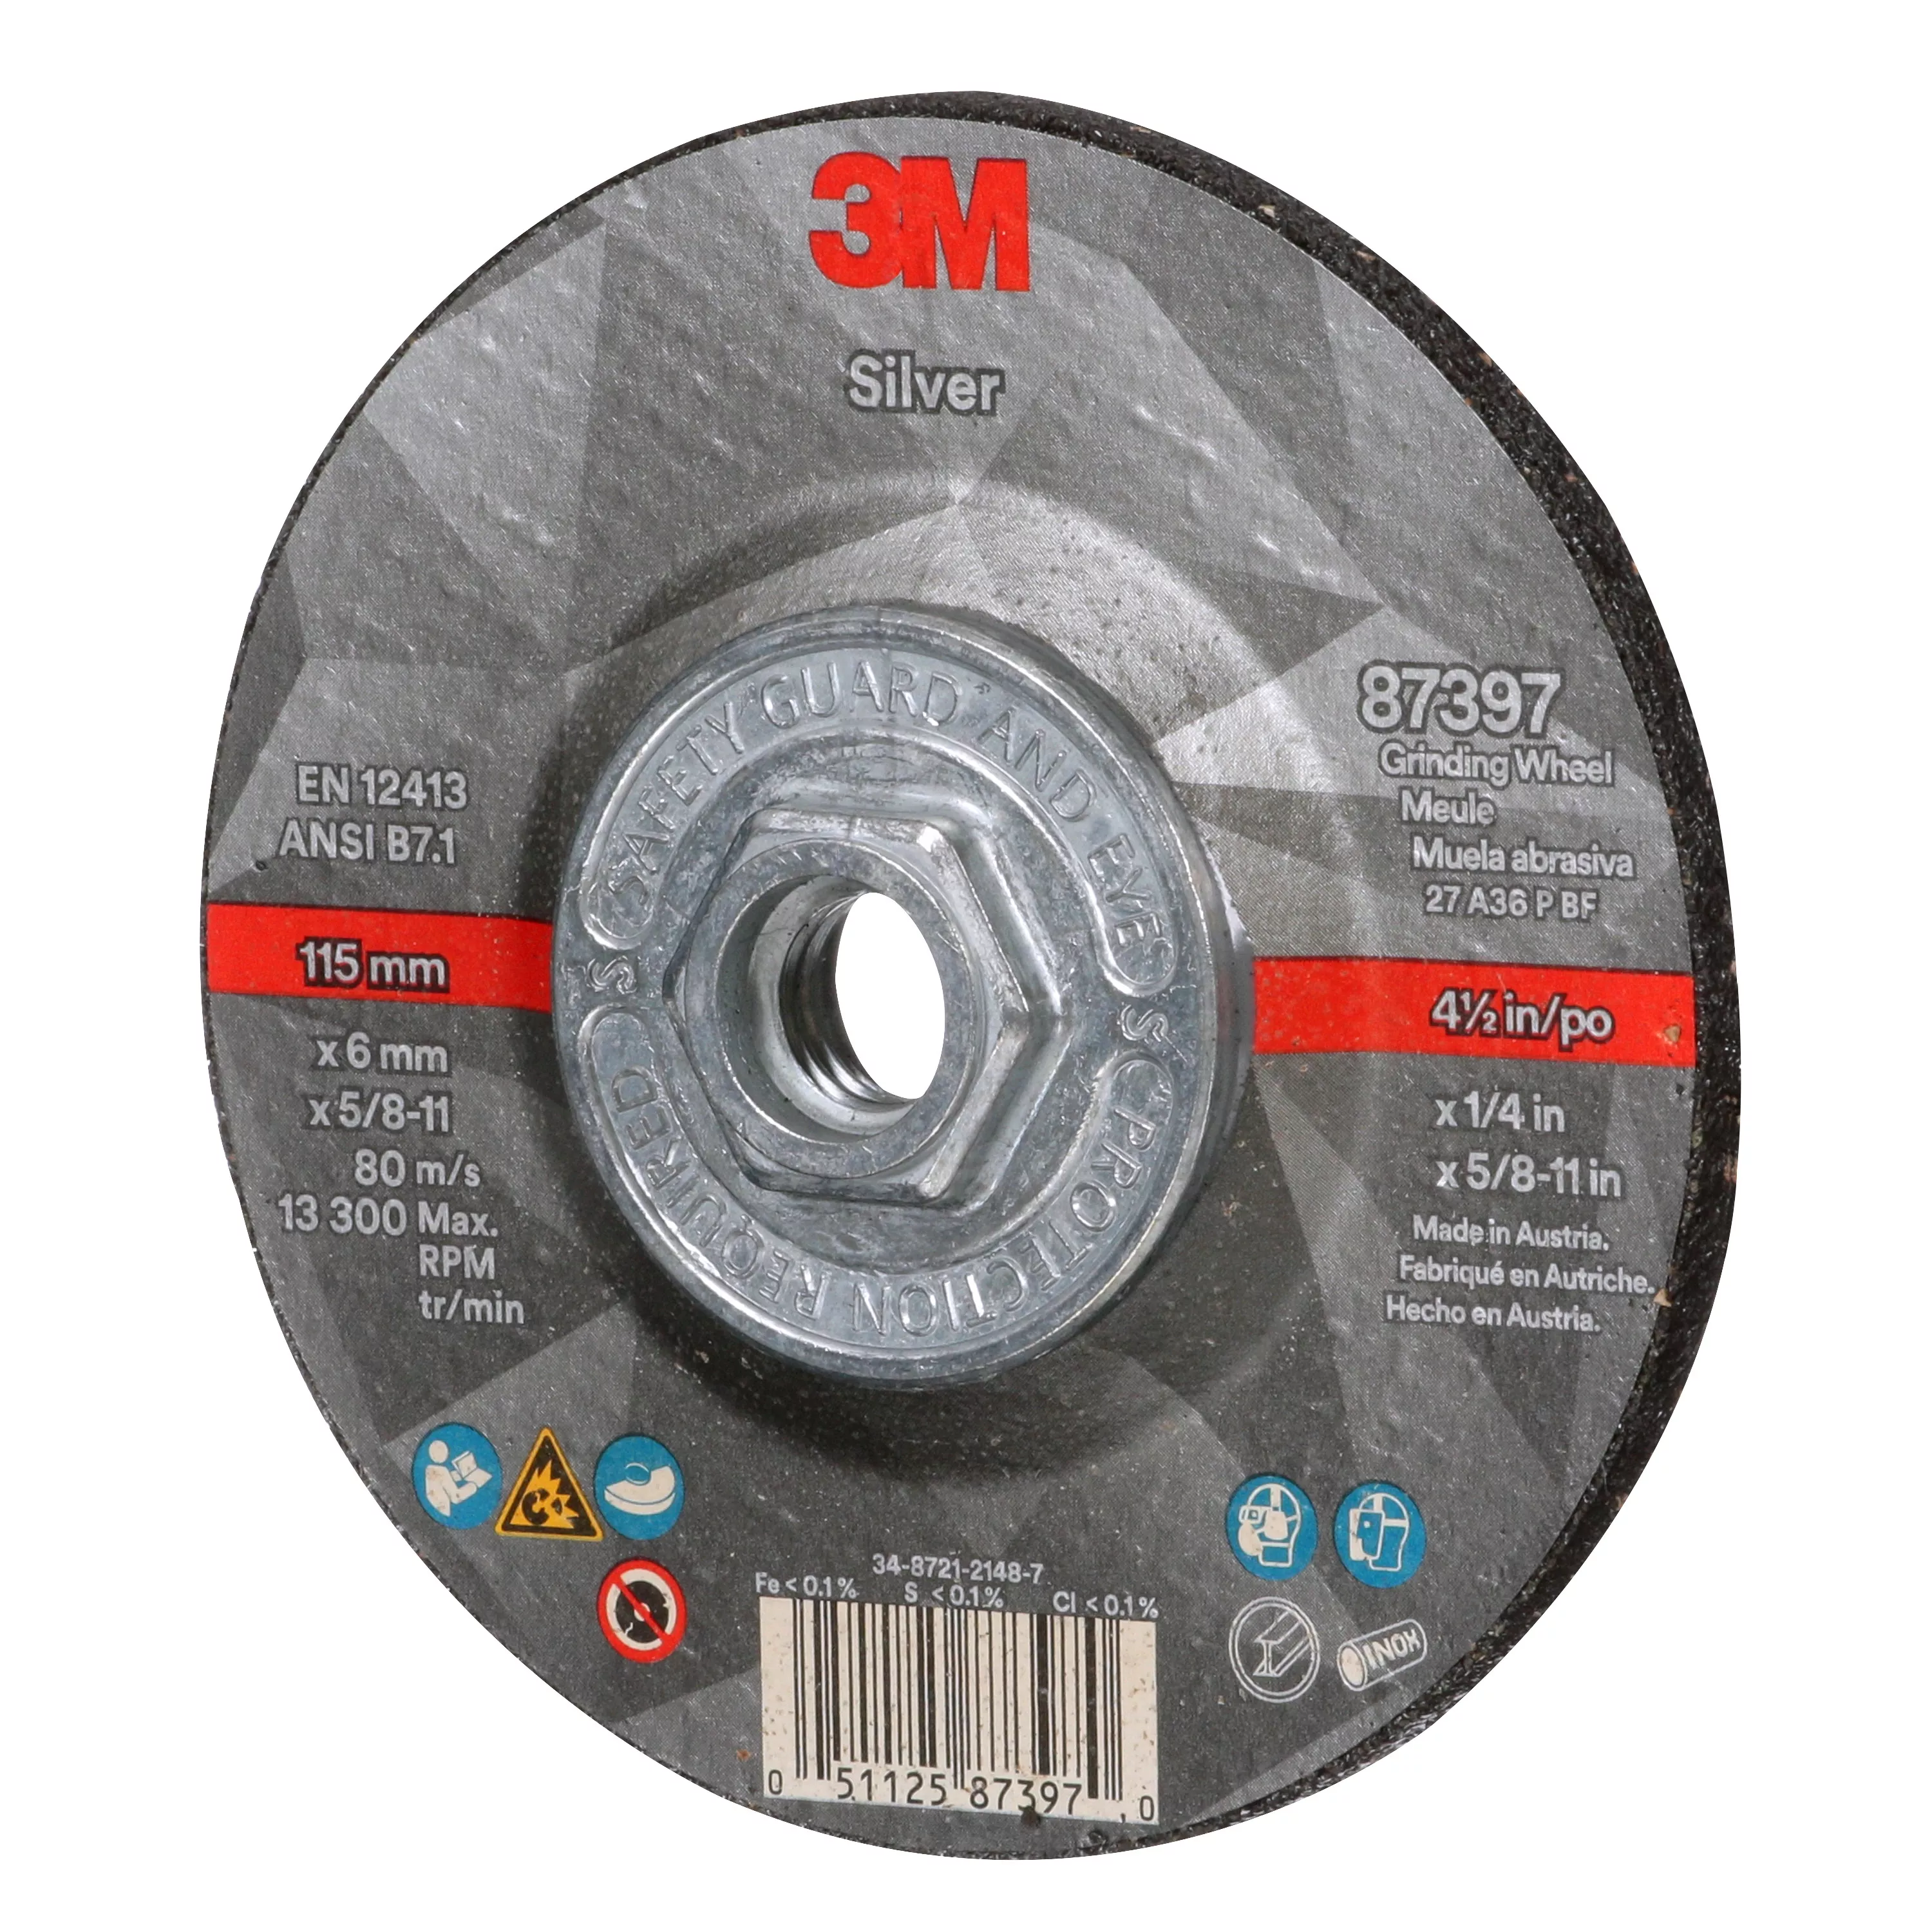 Product Number 87397 | 3M™ Silver Depressed Center Grinding Wheel